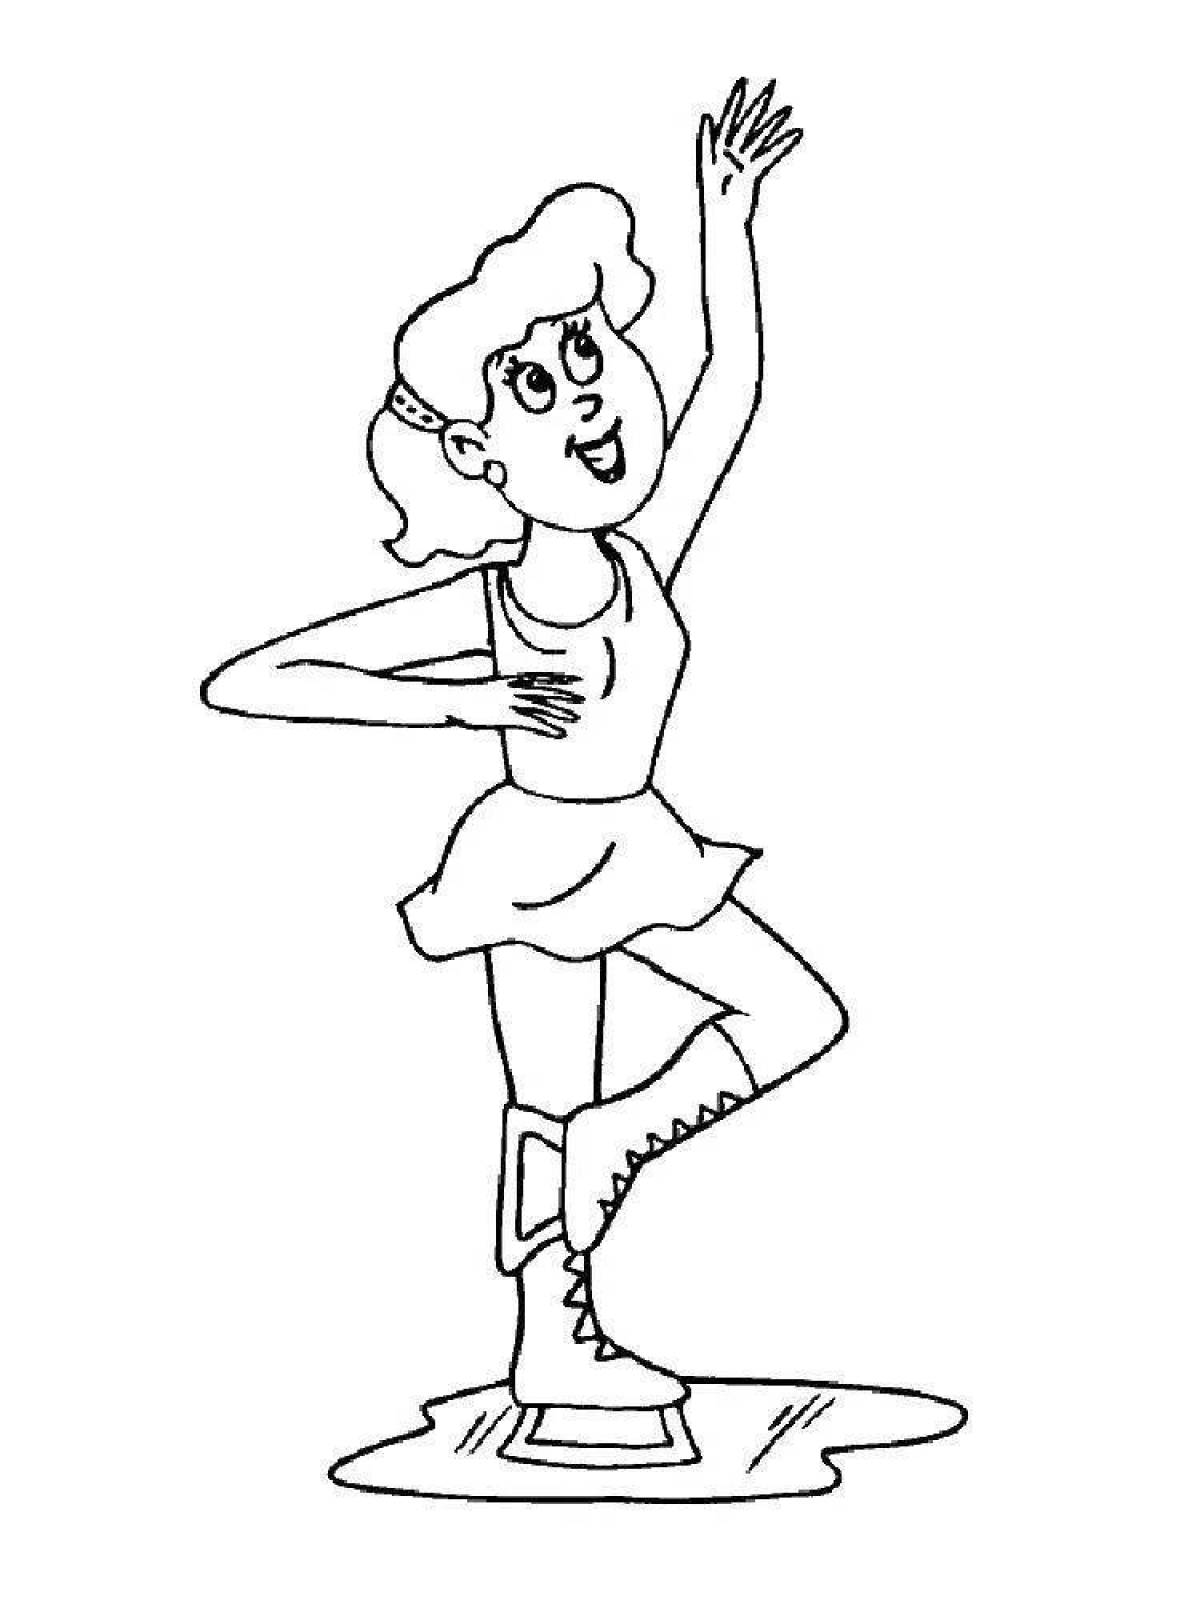 A dazzling figure skater coloring pages for kids